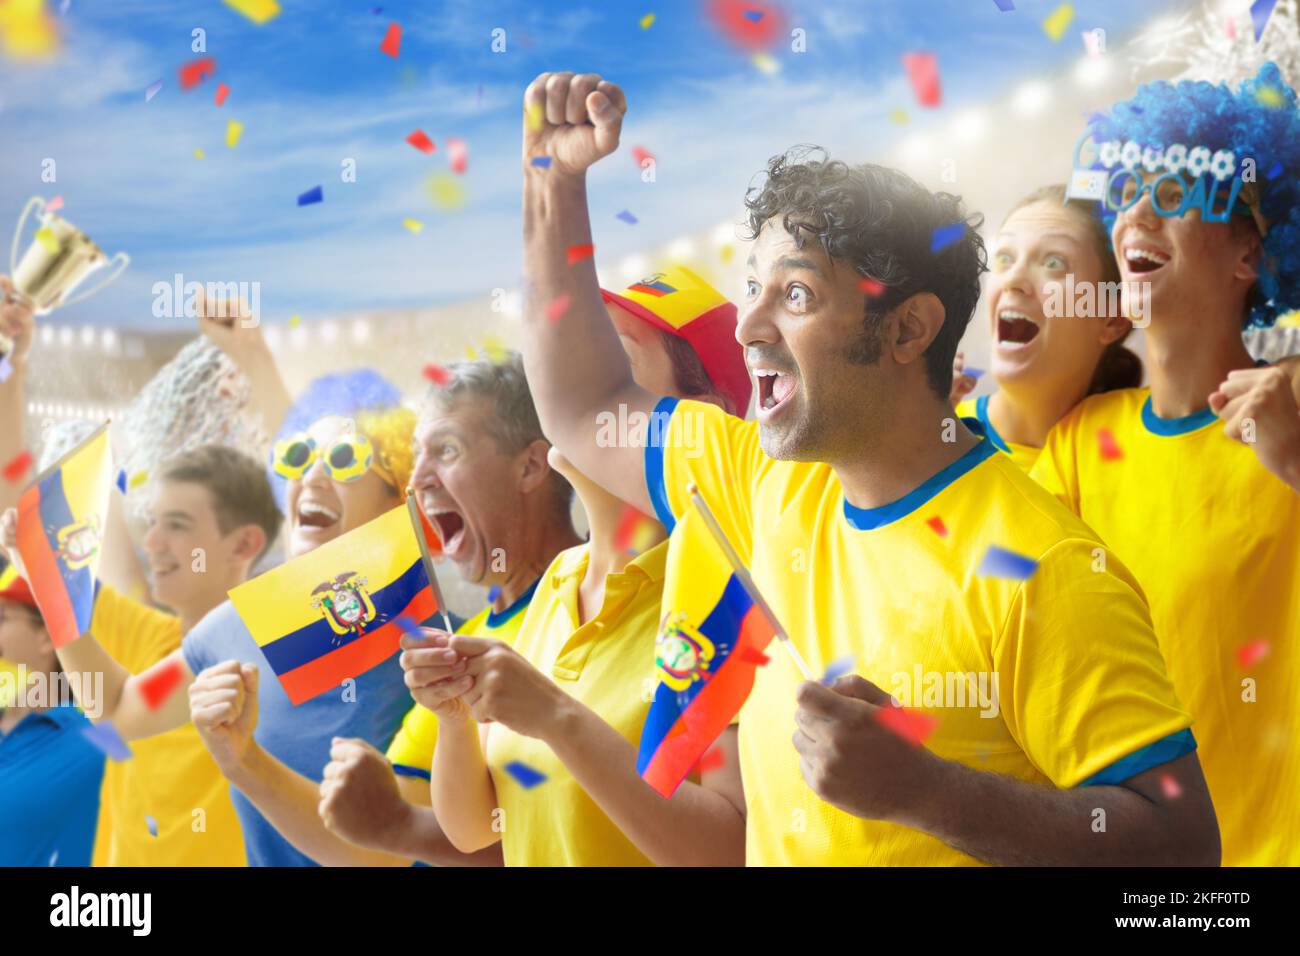 Ecuador football supporter on stadium. Ecuadorian fans on soccer pitch watching team play. Group of supporters with flag and national jersey Stock Photo